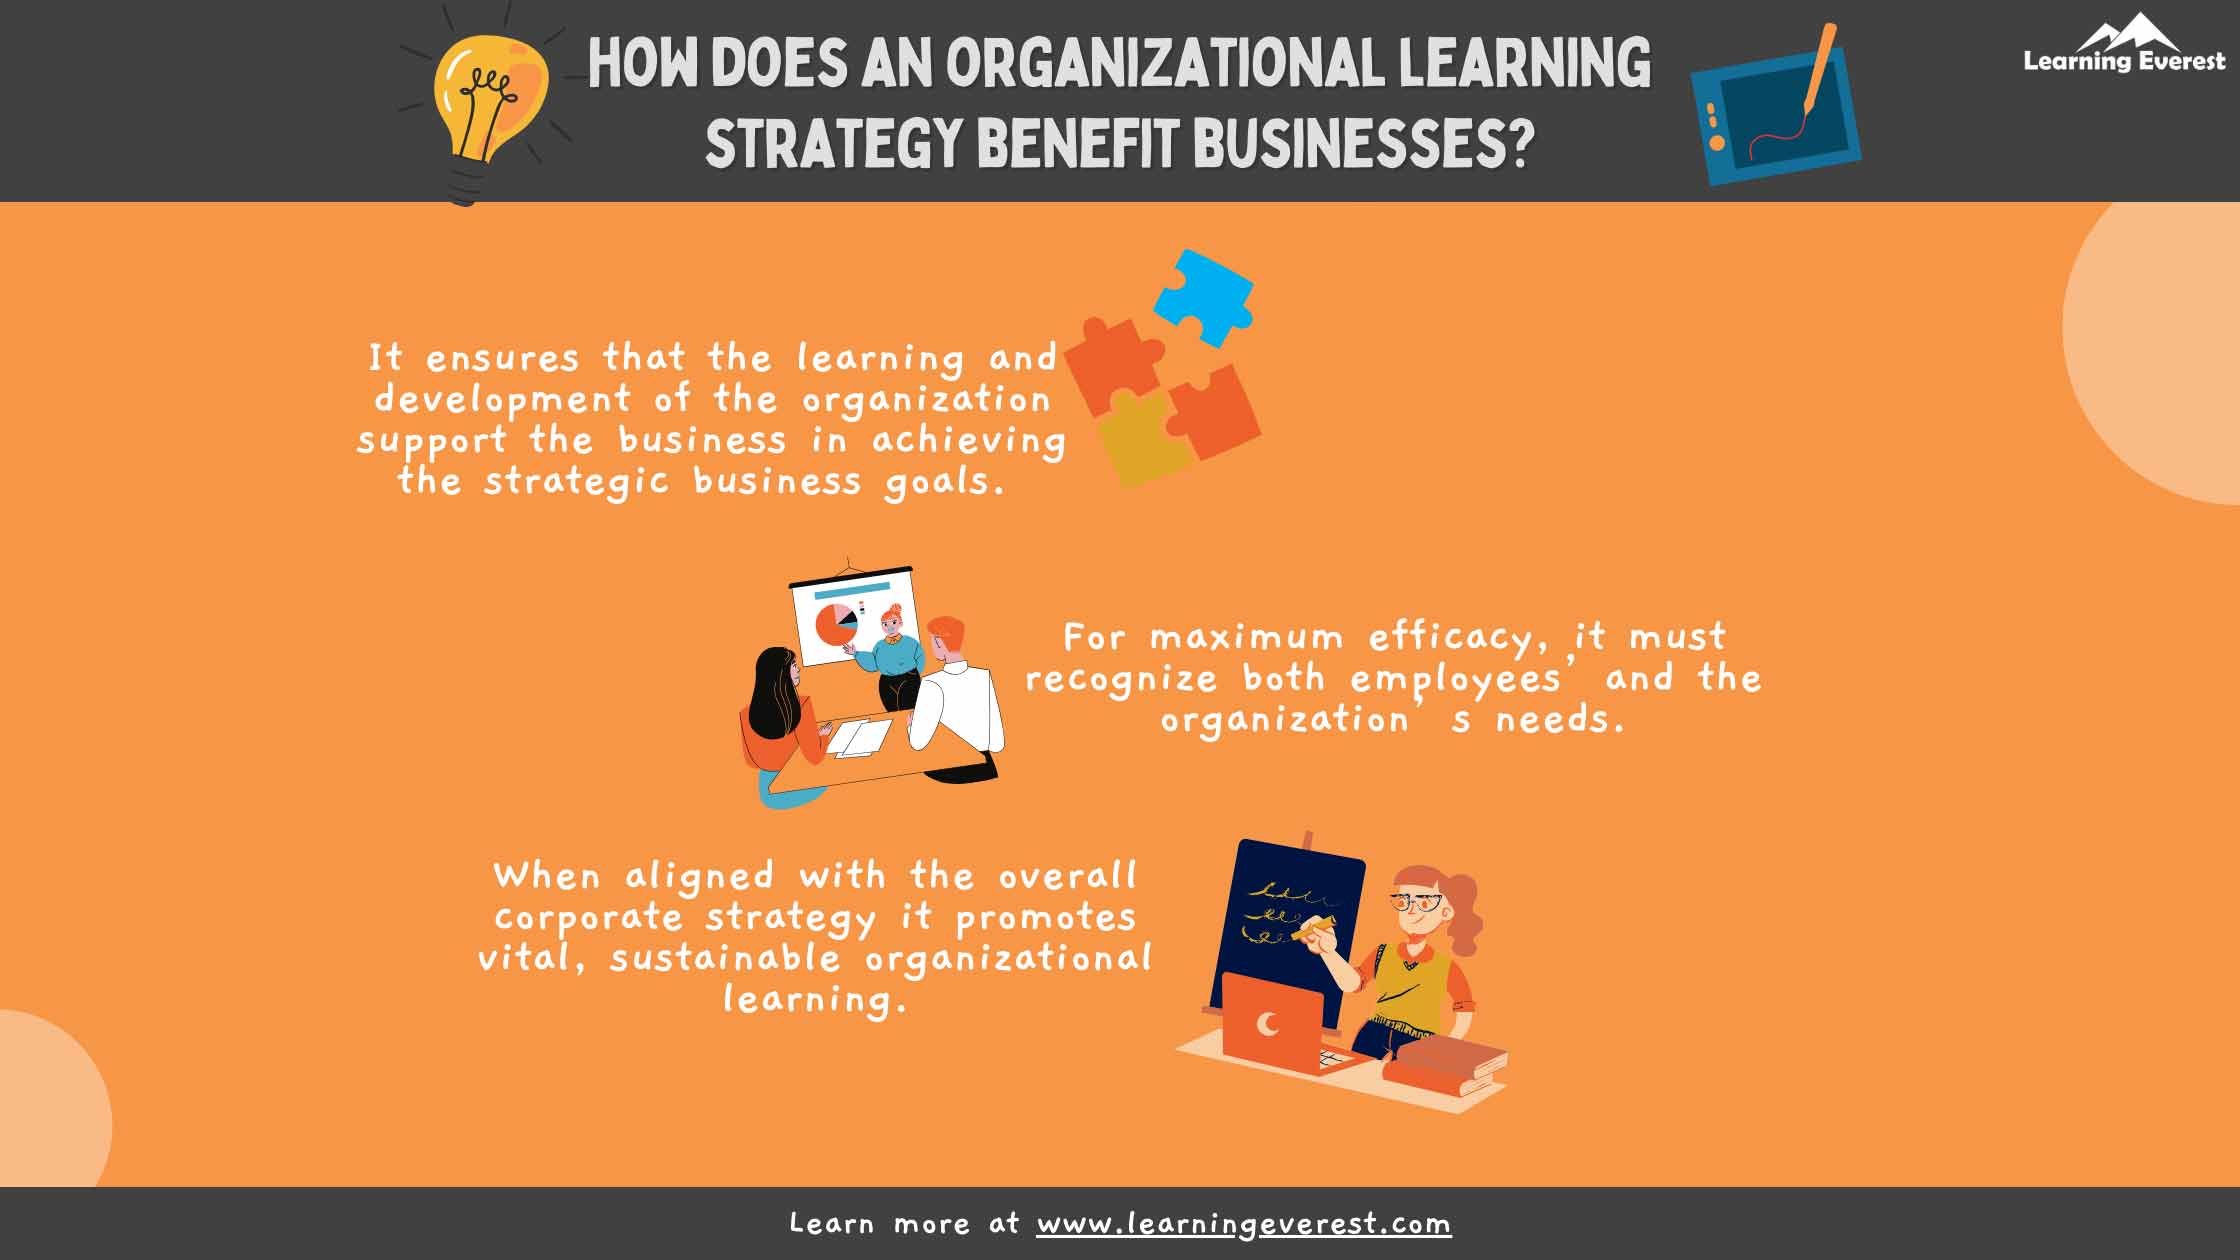 How Does an Organizational Learning Strategy Benefit Businesses